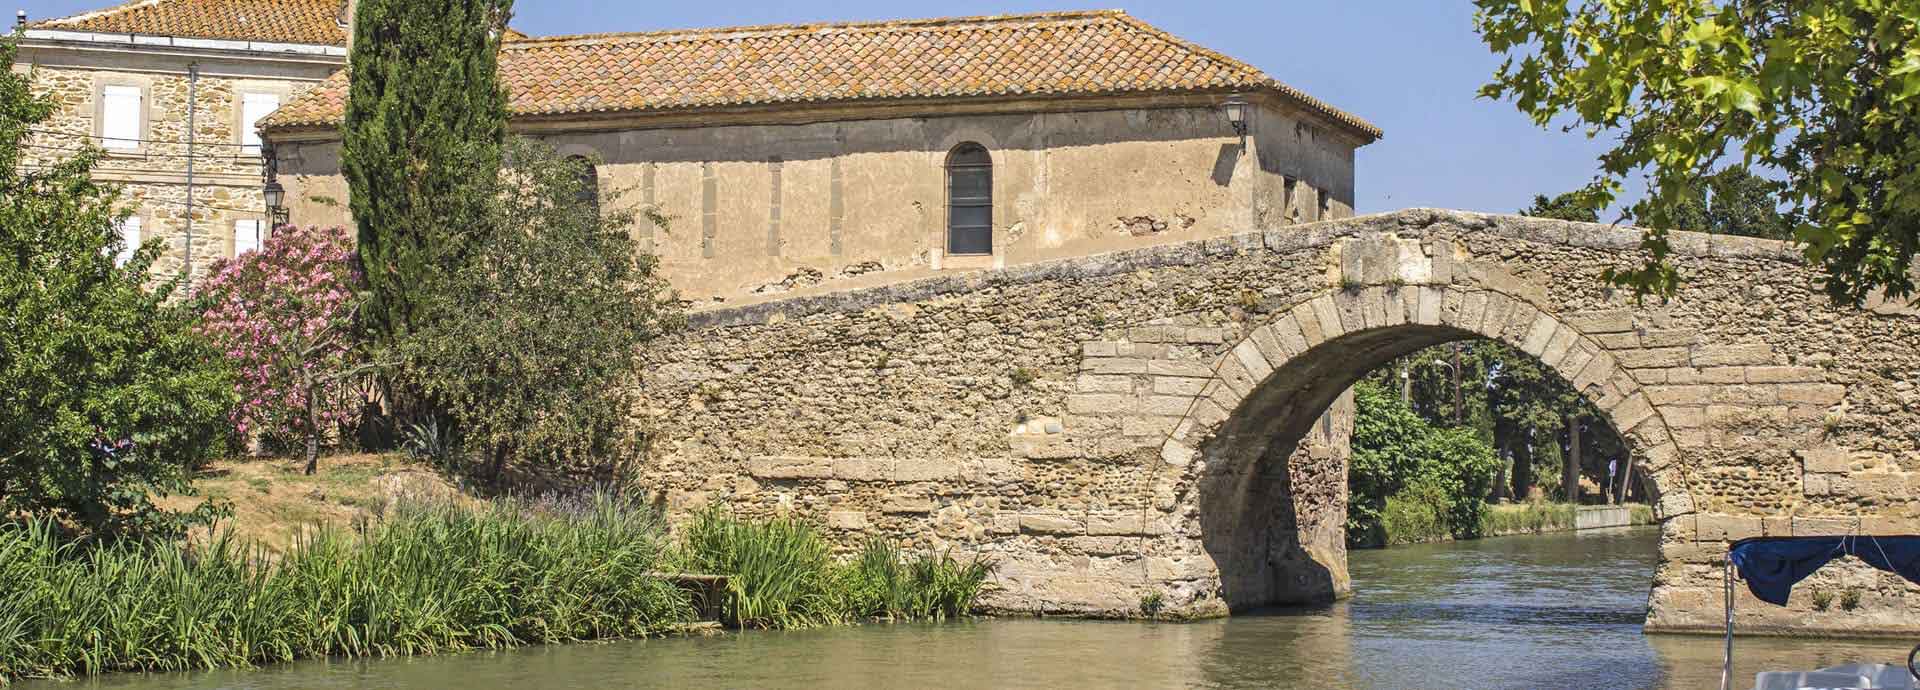 The Canal du Midi and Pont Neuf du Somail, located in the Aude Department